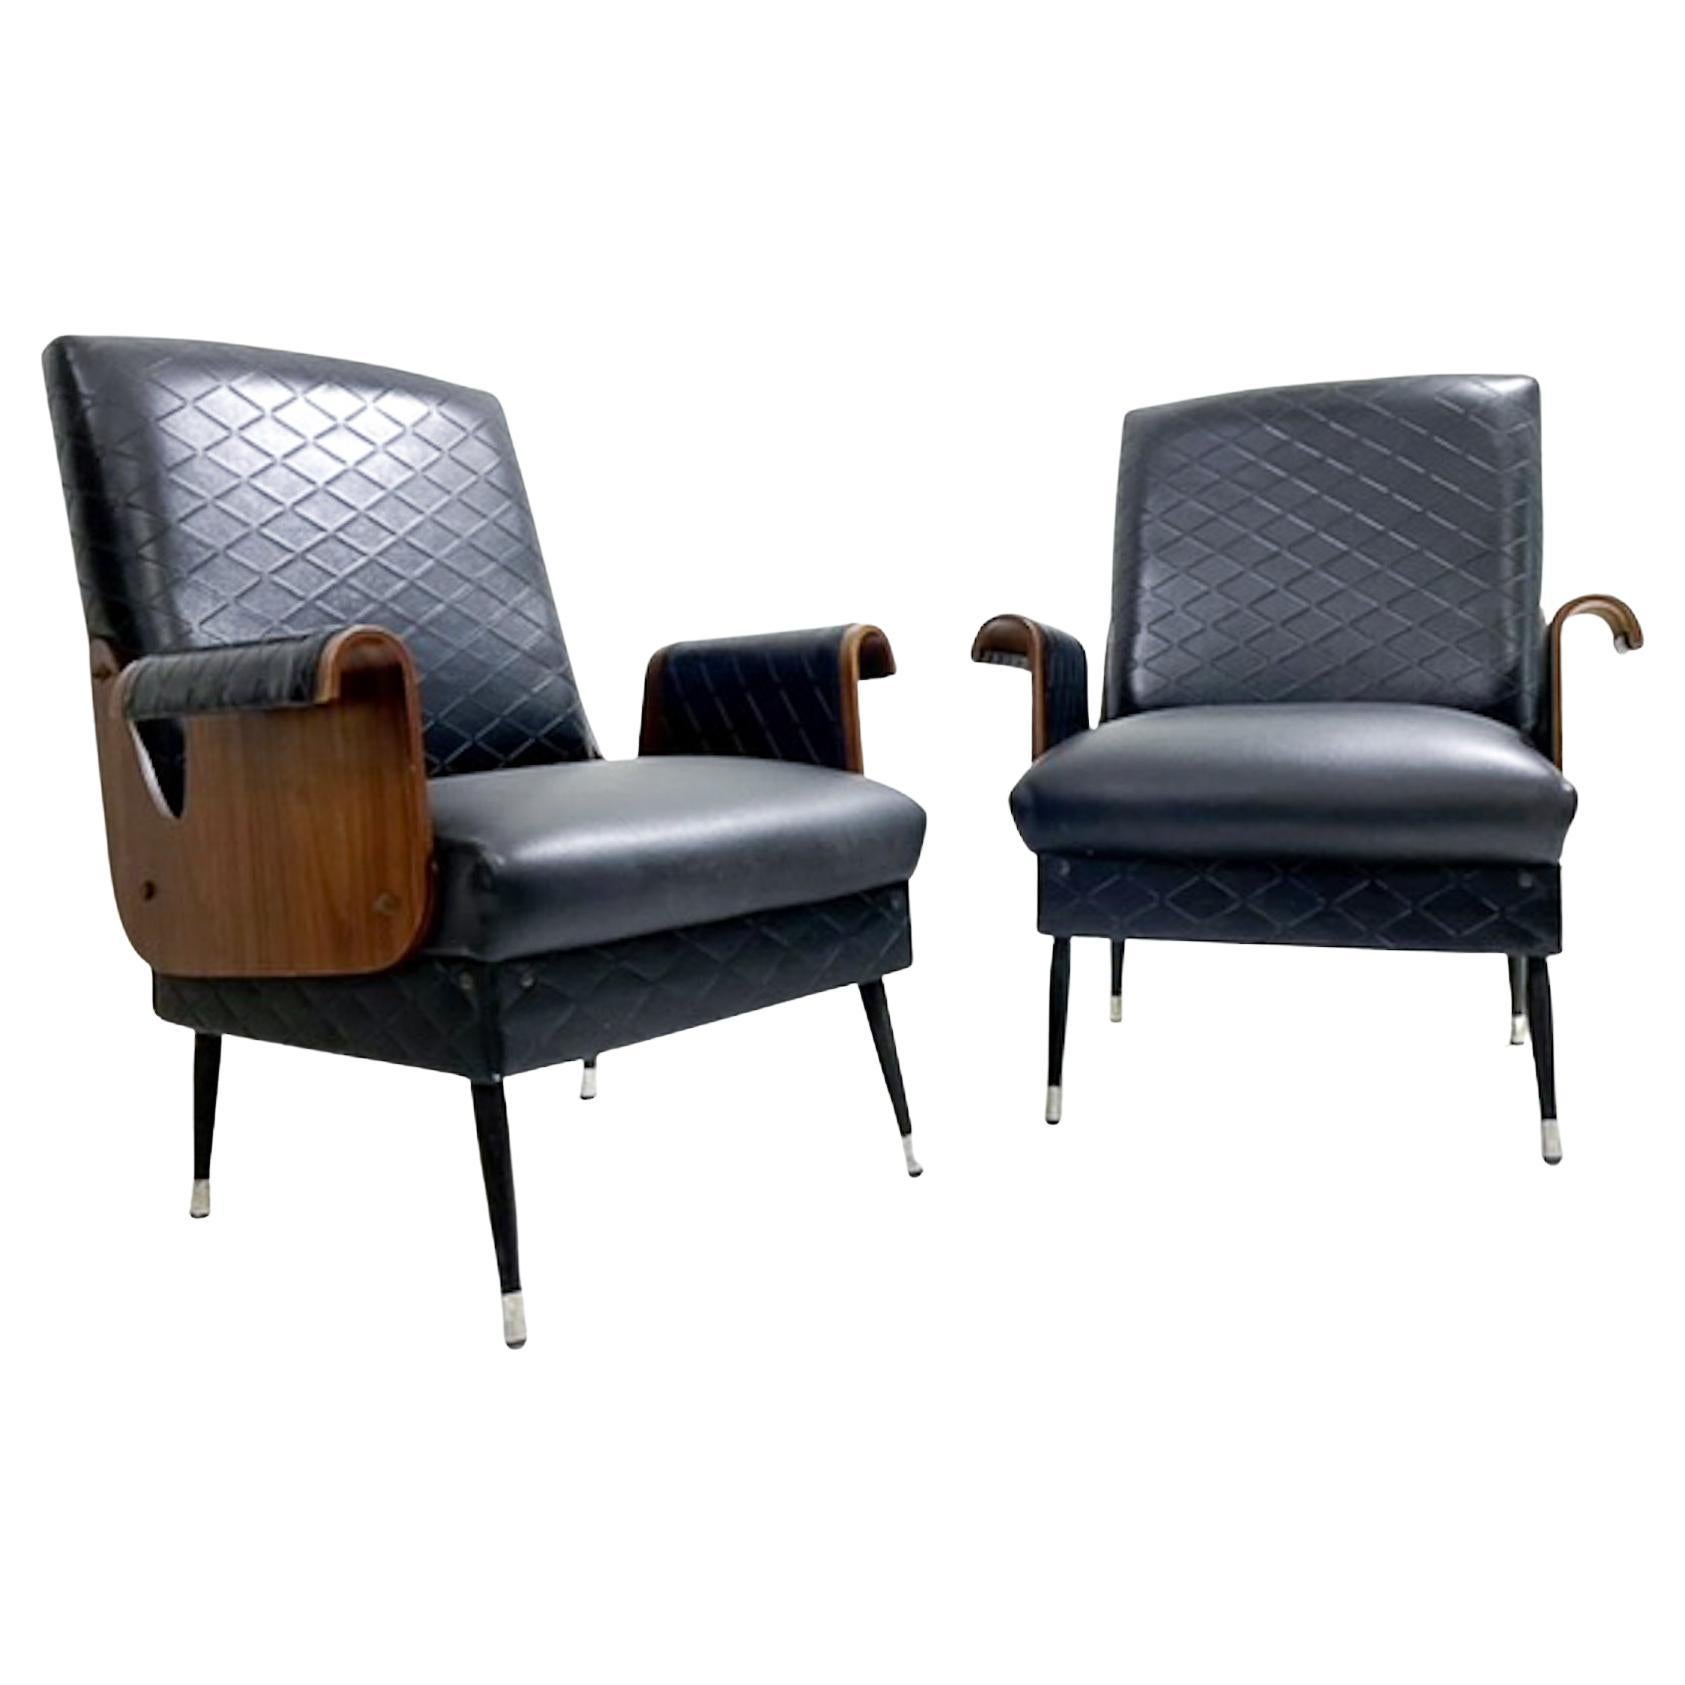 Pair of Mid-Century Modern Armchairs, Walnut and Vegan Leather, Italy, 1960s For Sale